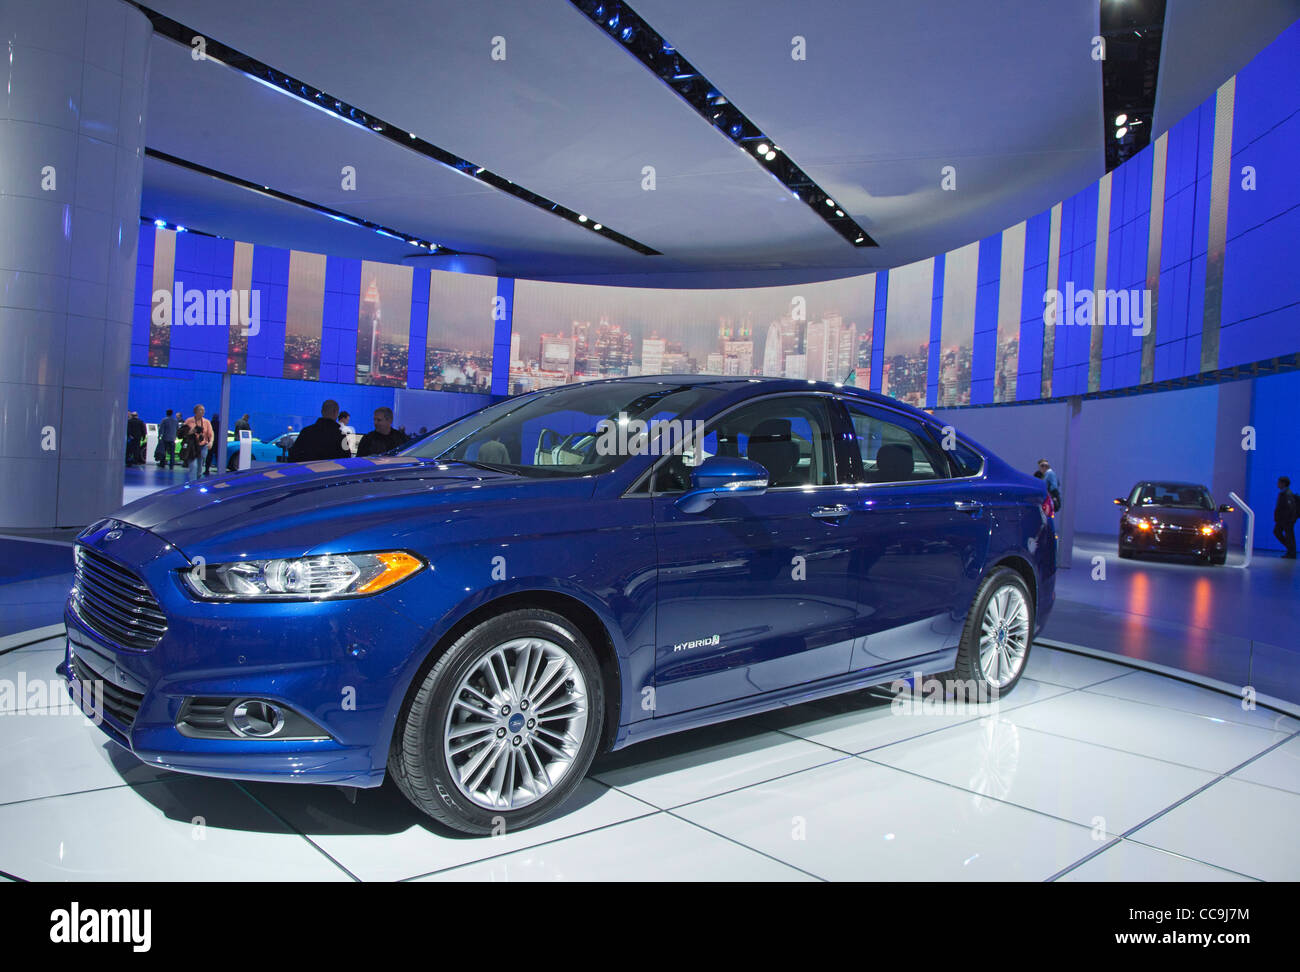 Detroit, Michigan - The Ford Fusion hybrid on display at the North American International Auto Show. Stock Photo